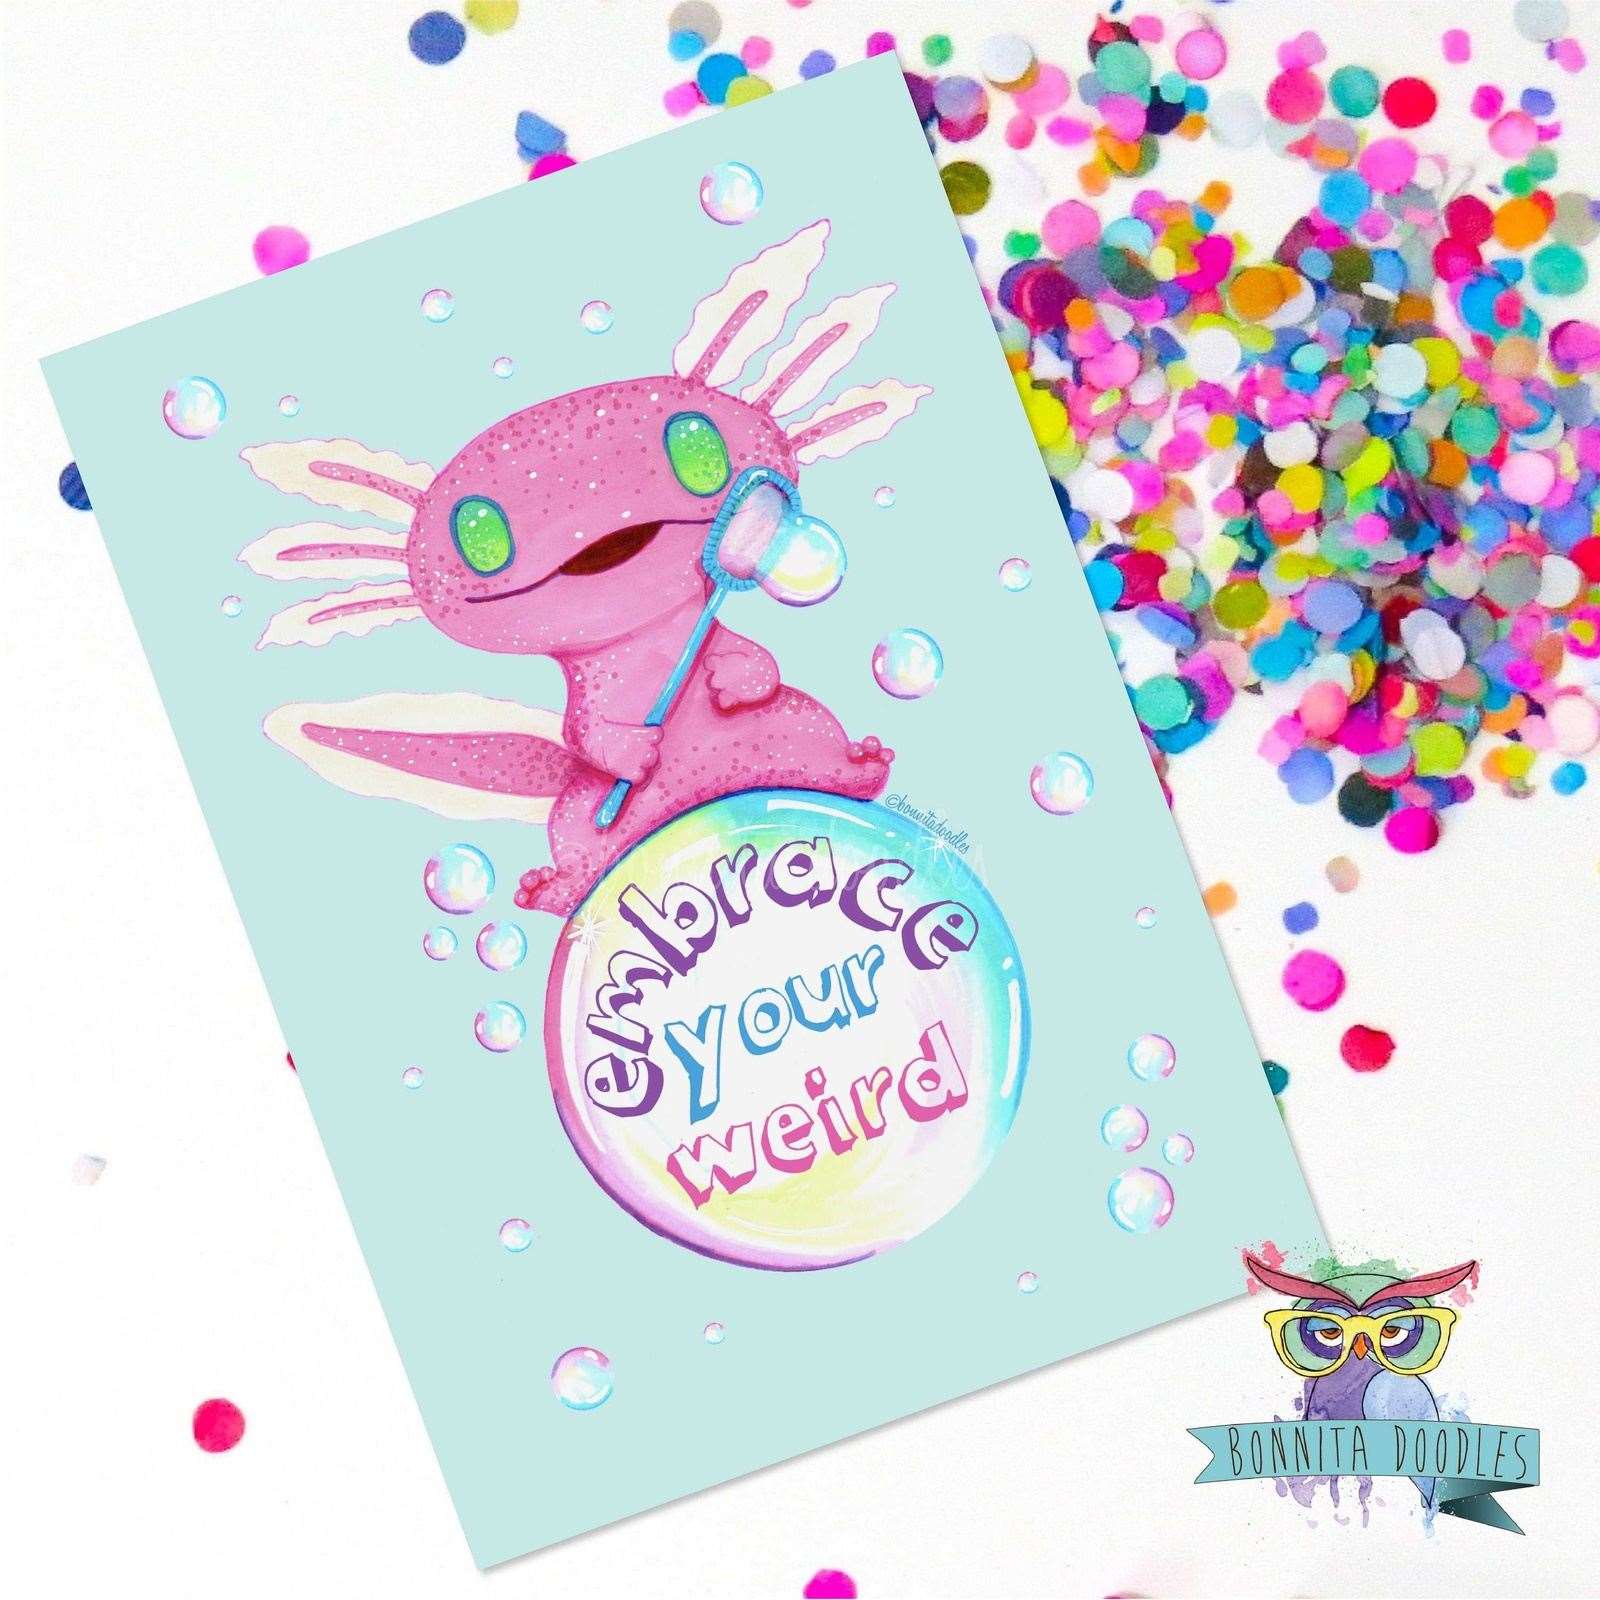 Axolotl Newt Embrace your weird A6 print - now in Holographic too